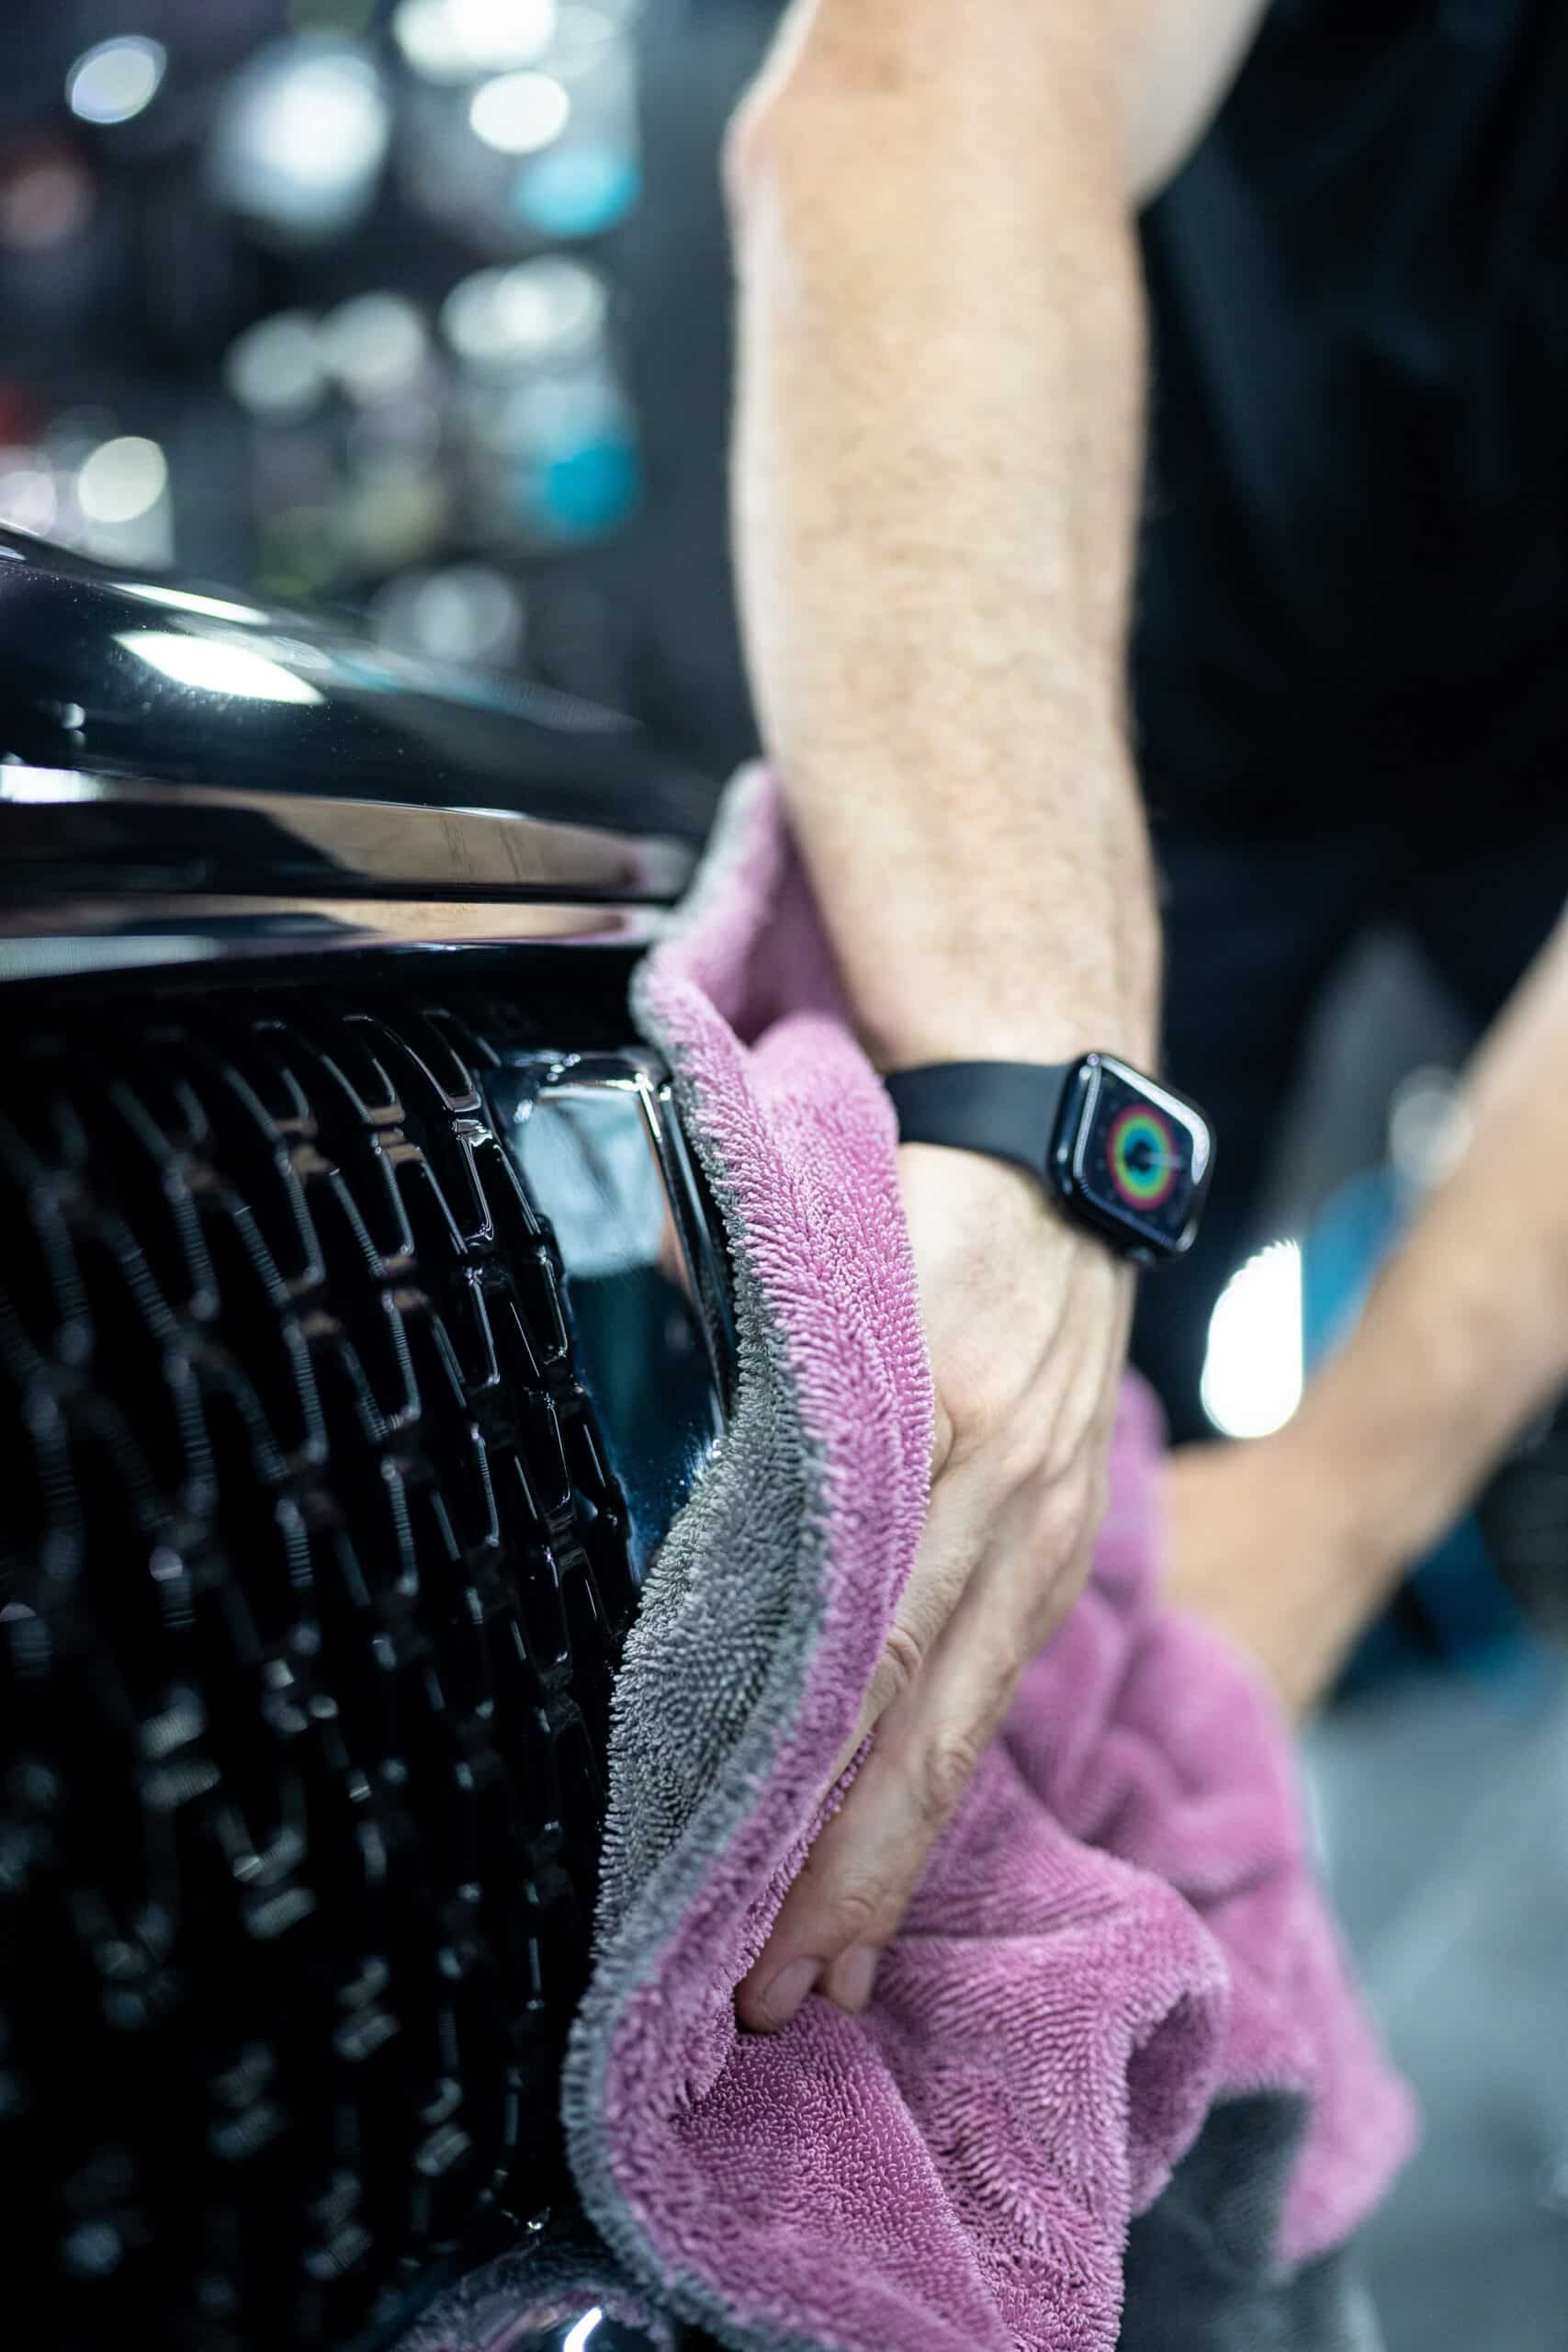 A man wearing an apple watch is cleaning a car with a towel.